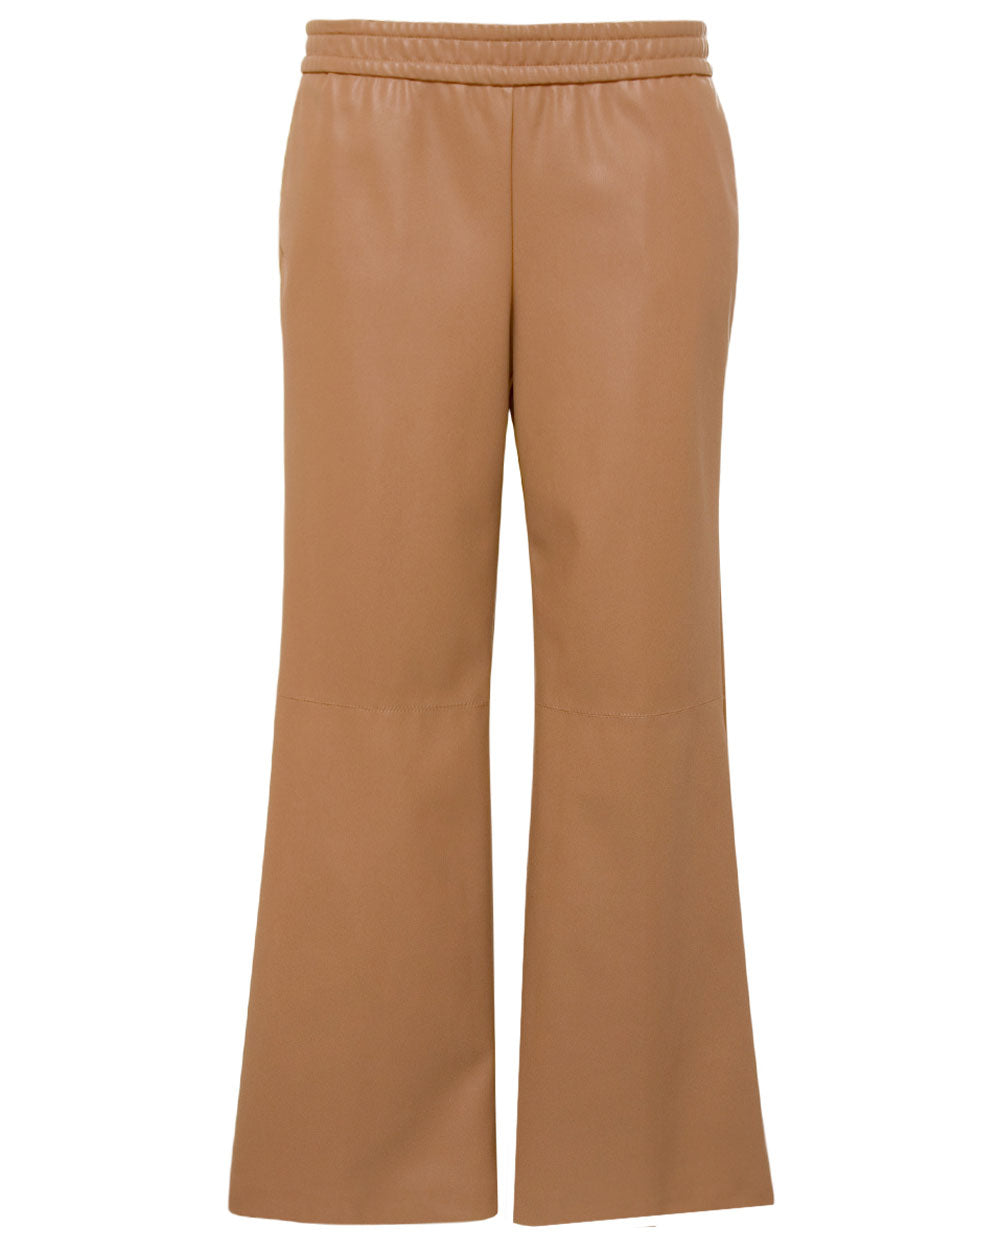 Eco Leather Trousers in Cookies